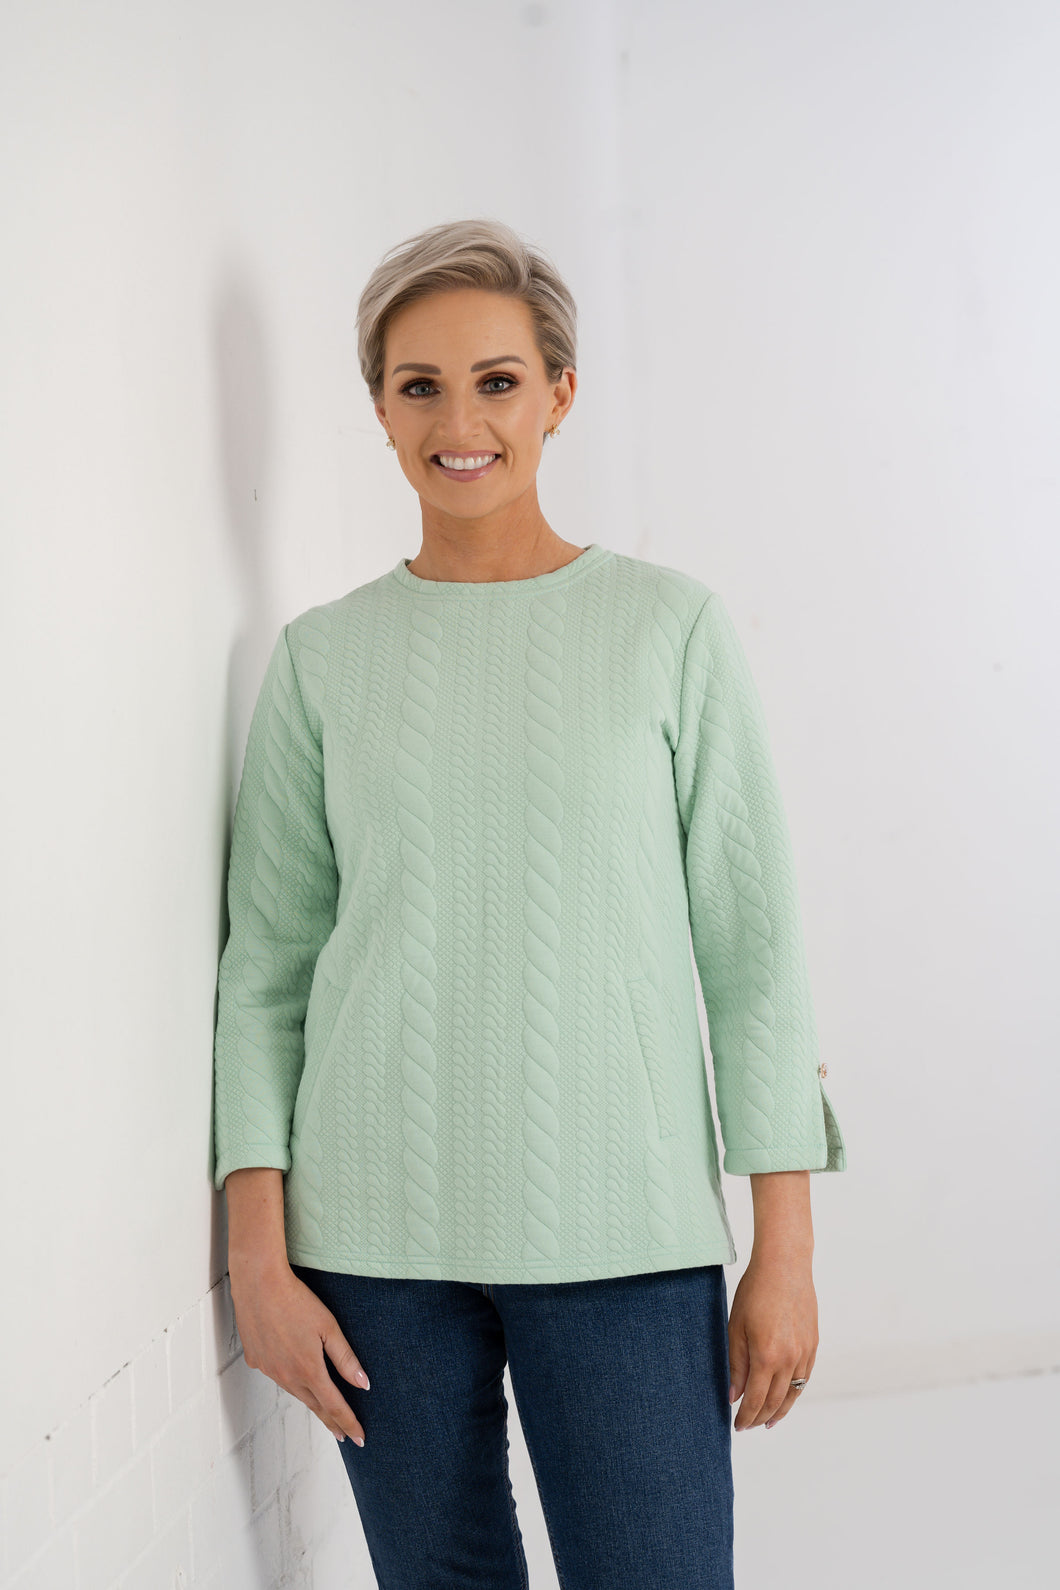 THE LAYLA Long Line Cabled Sweater - MINT